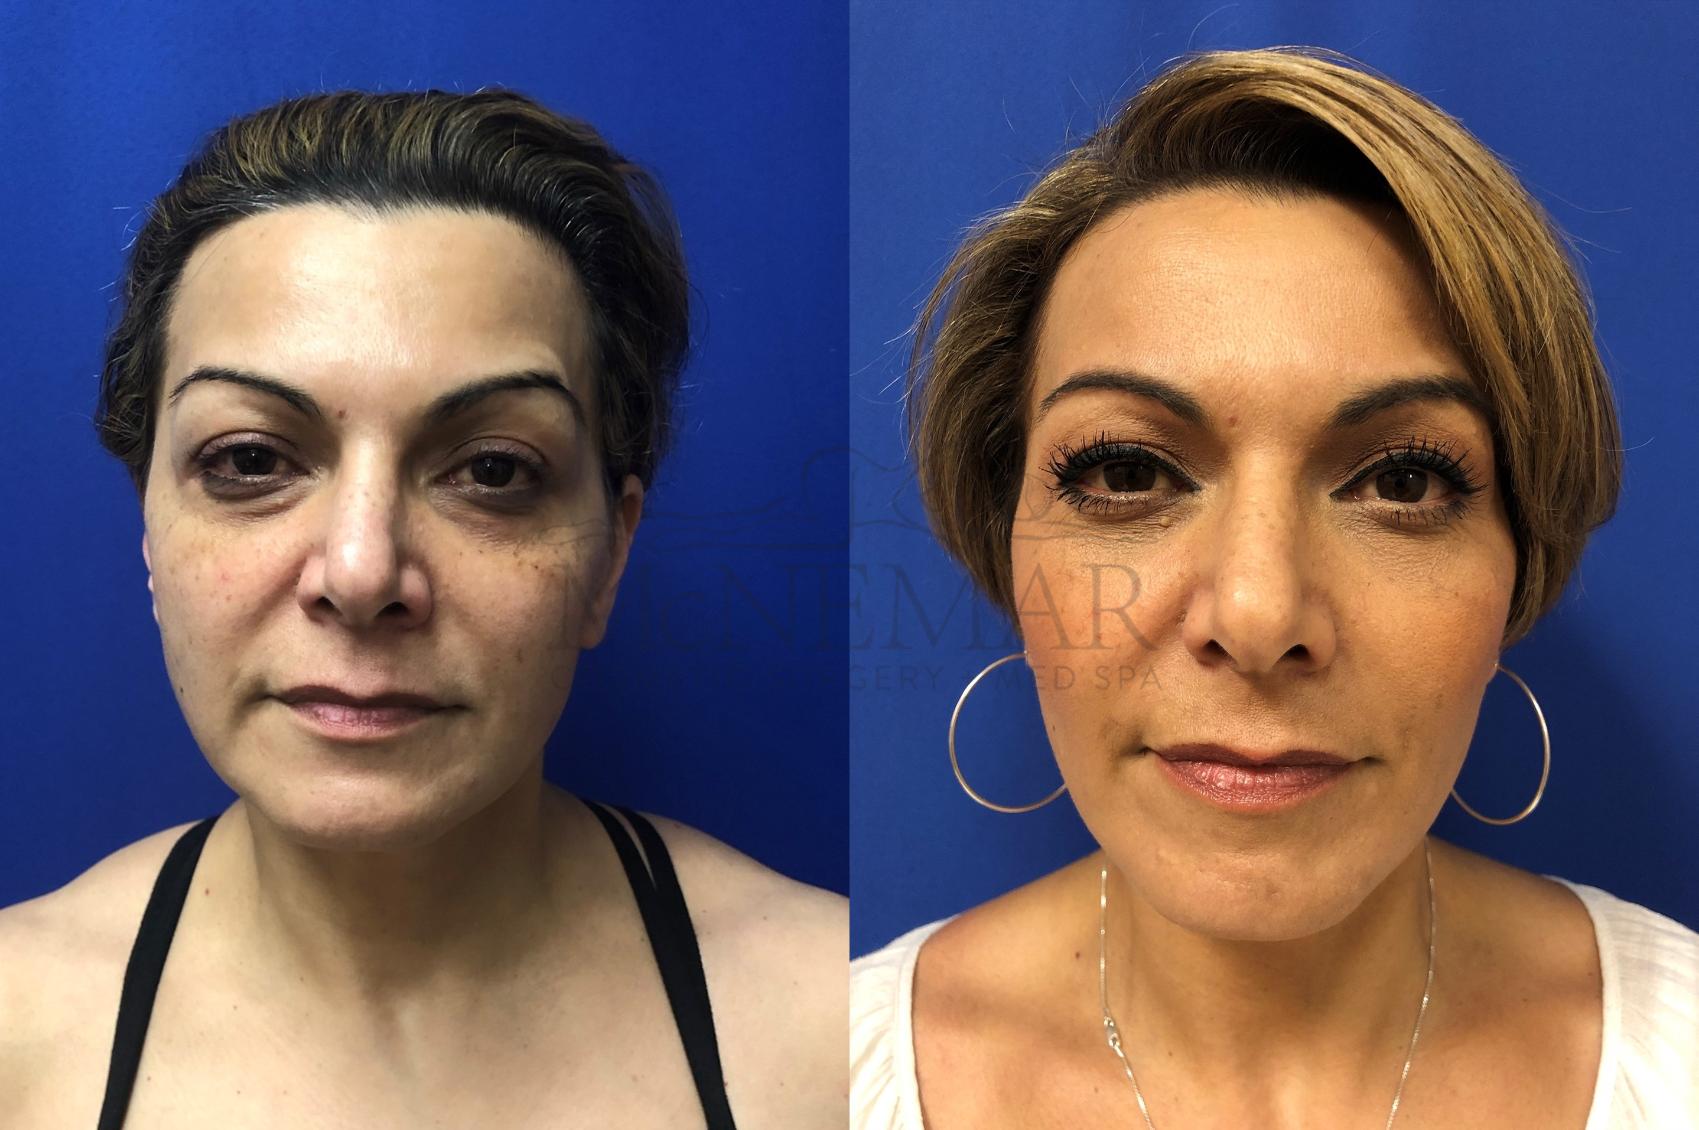 Facelift for a 50 year old female patient.